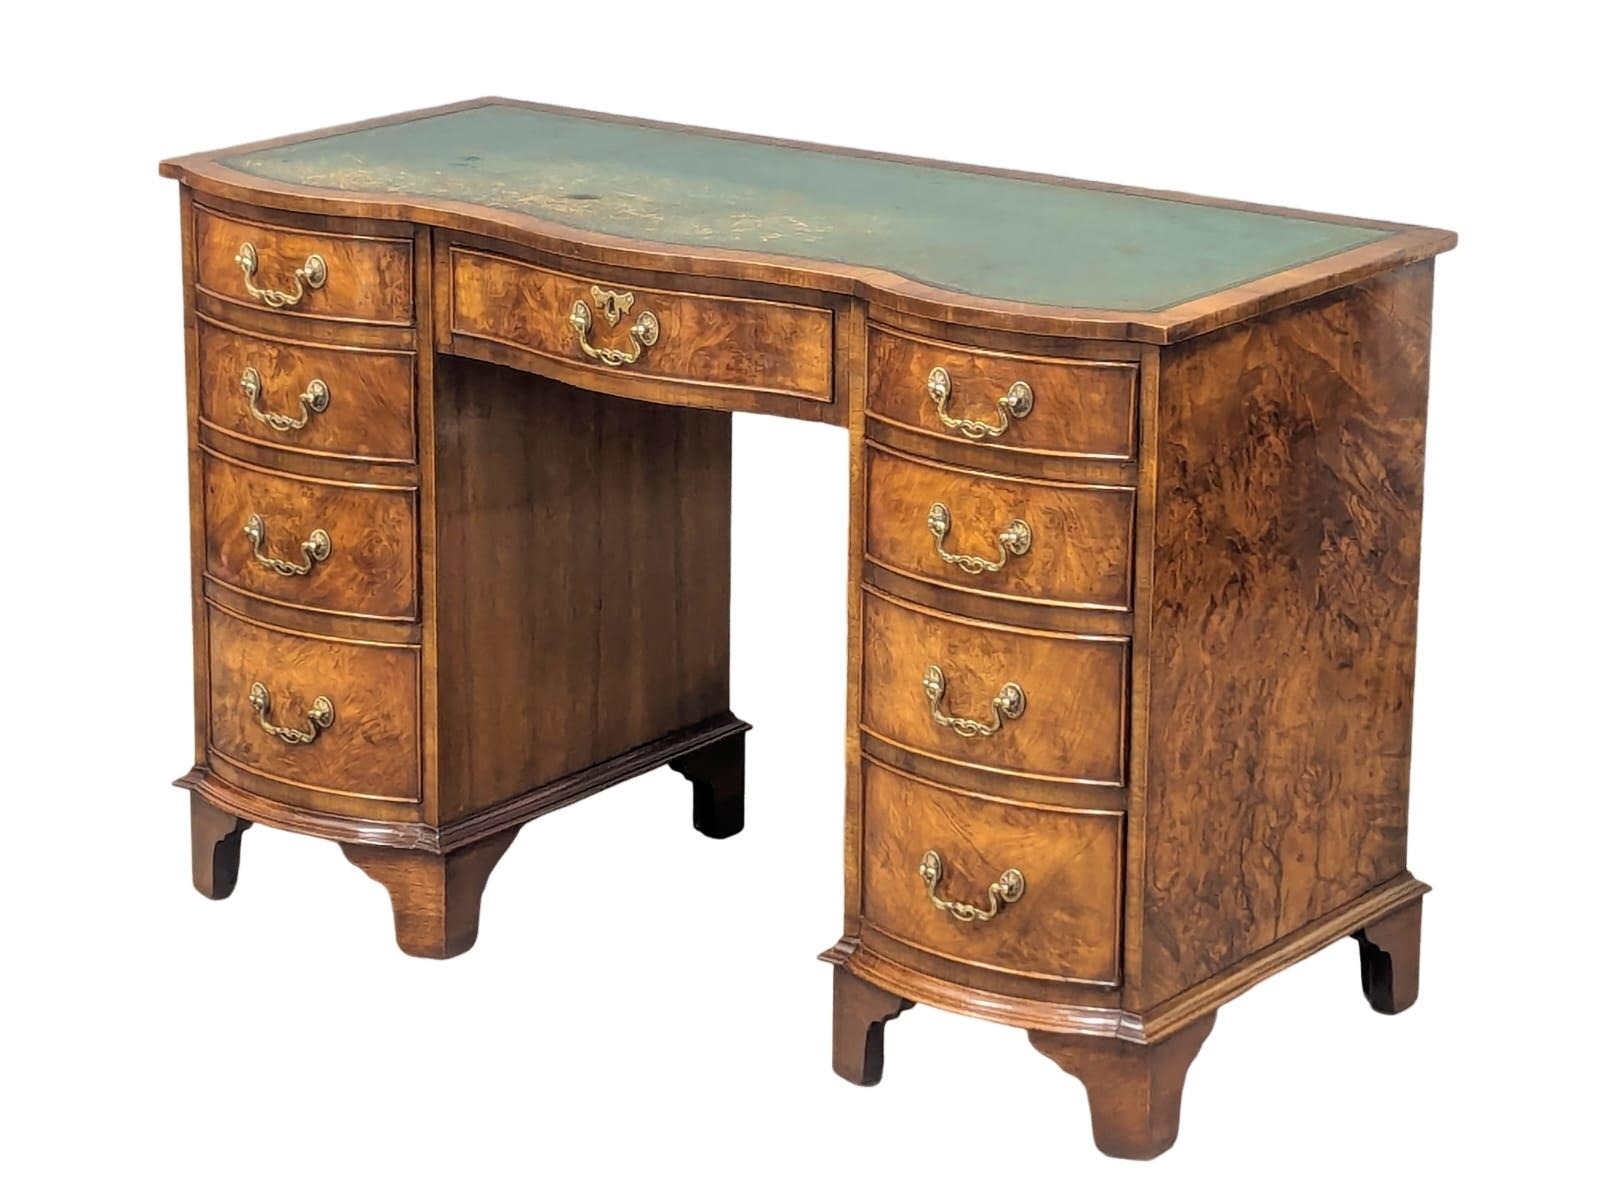 A Georgian style mahogany and burr walnut pedestal desk with leather top. 115x53.5x75cm